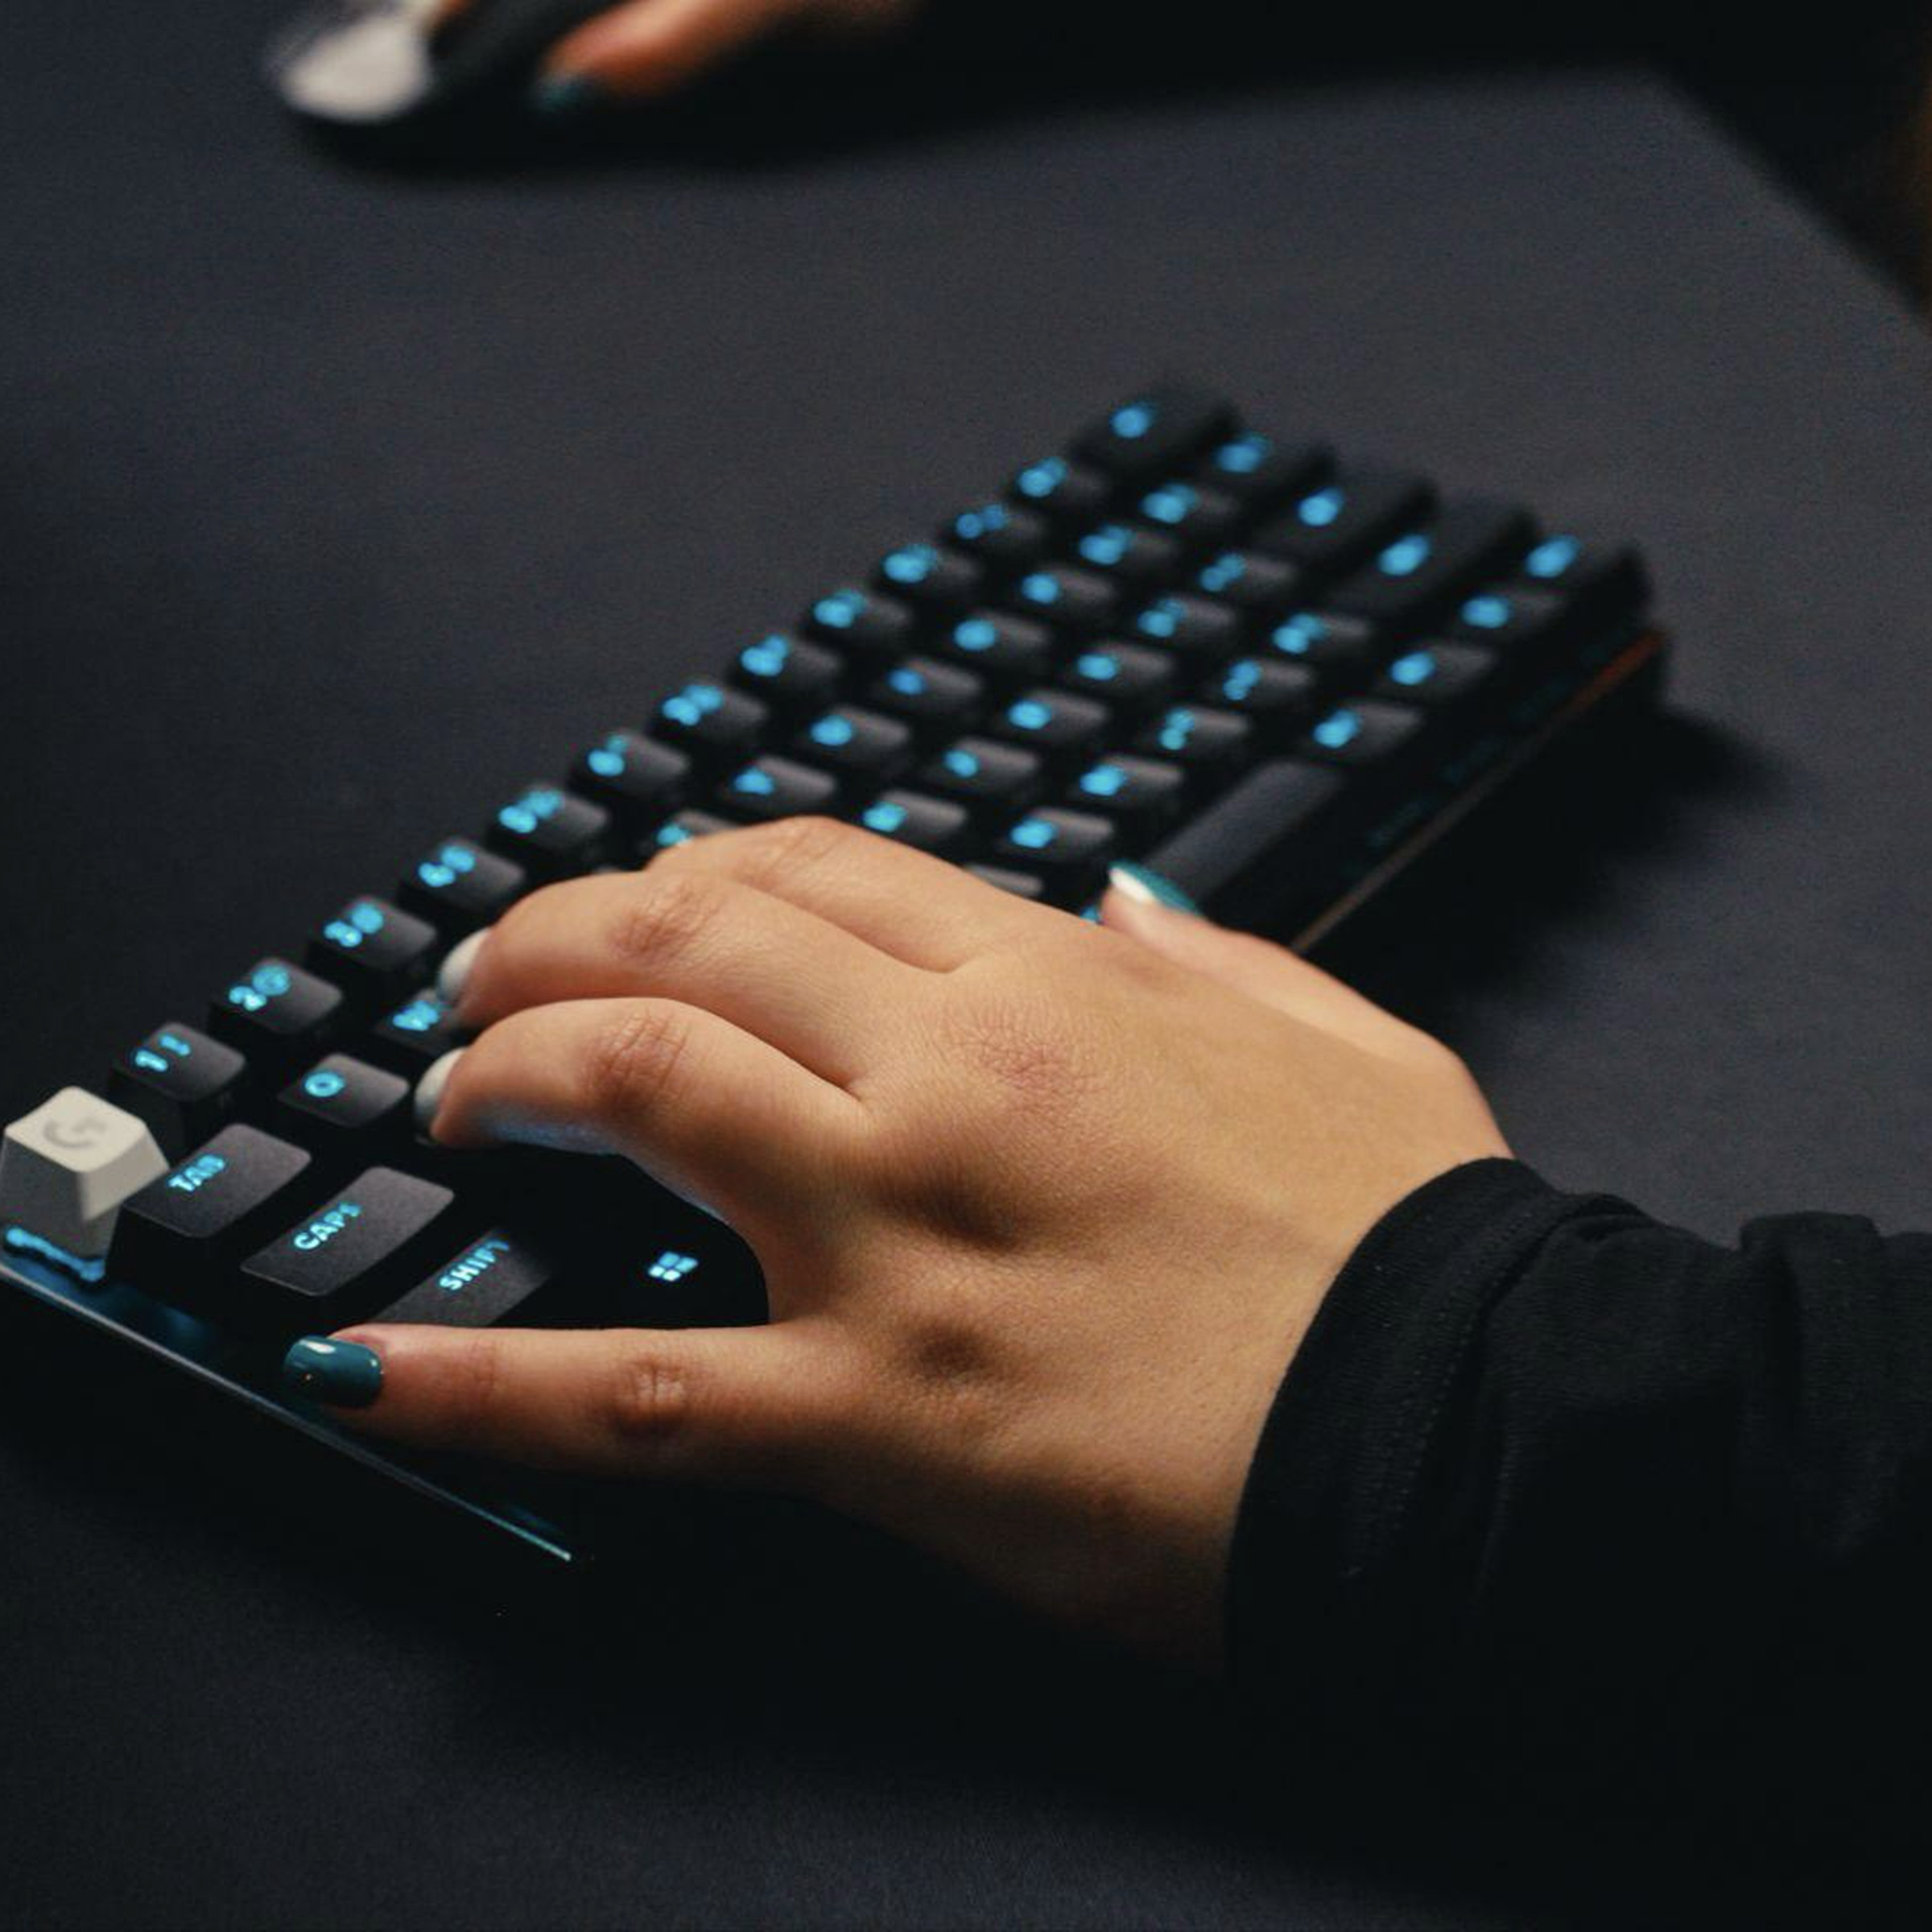 The Logitech G Pro X 60 Lightspeed being used on a desk.